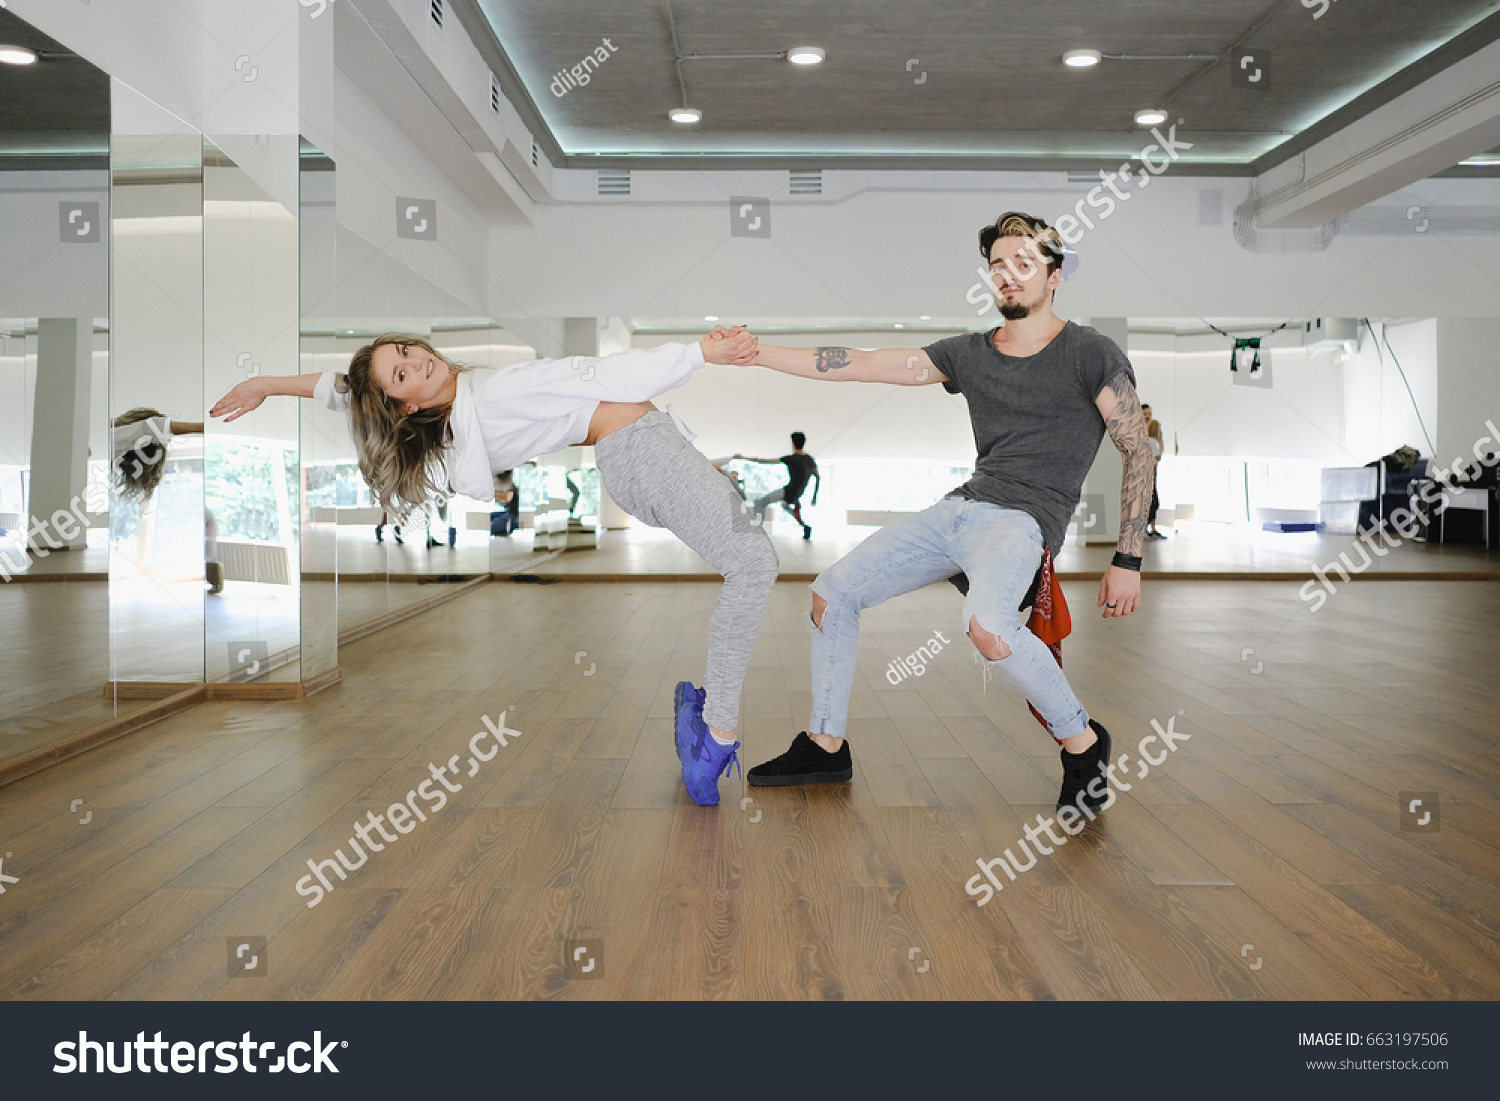 Young modern dancers dancing in the studio. Sport, dancing and urban culture concept #663197506